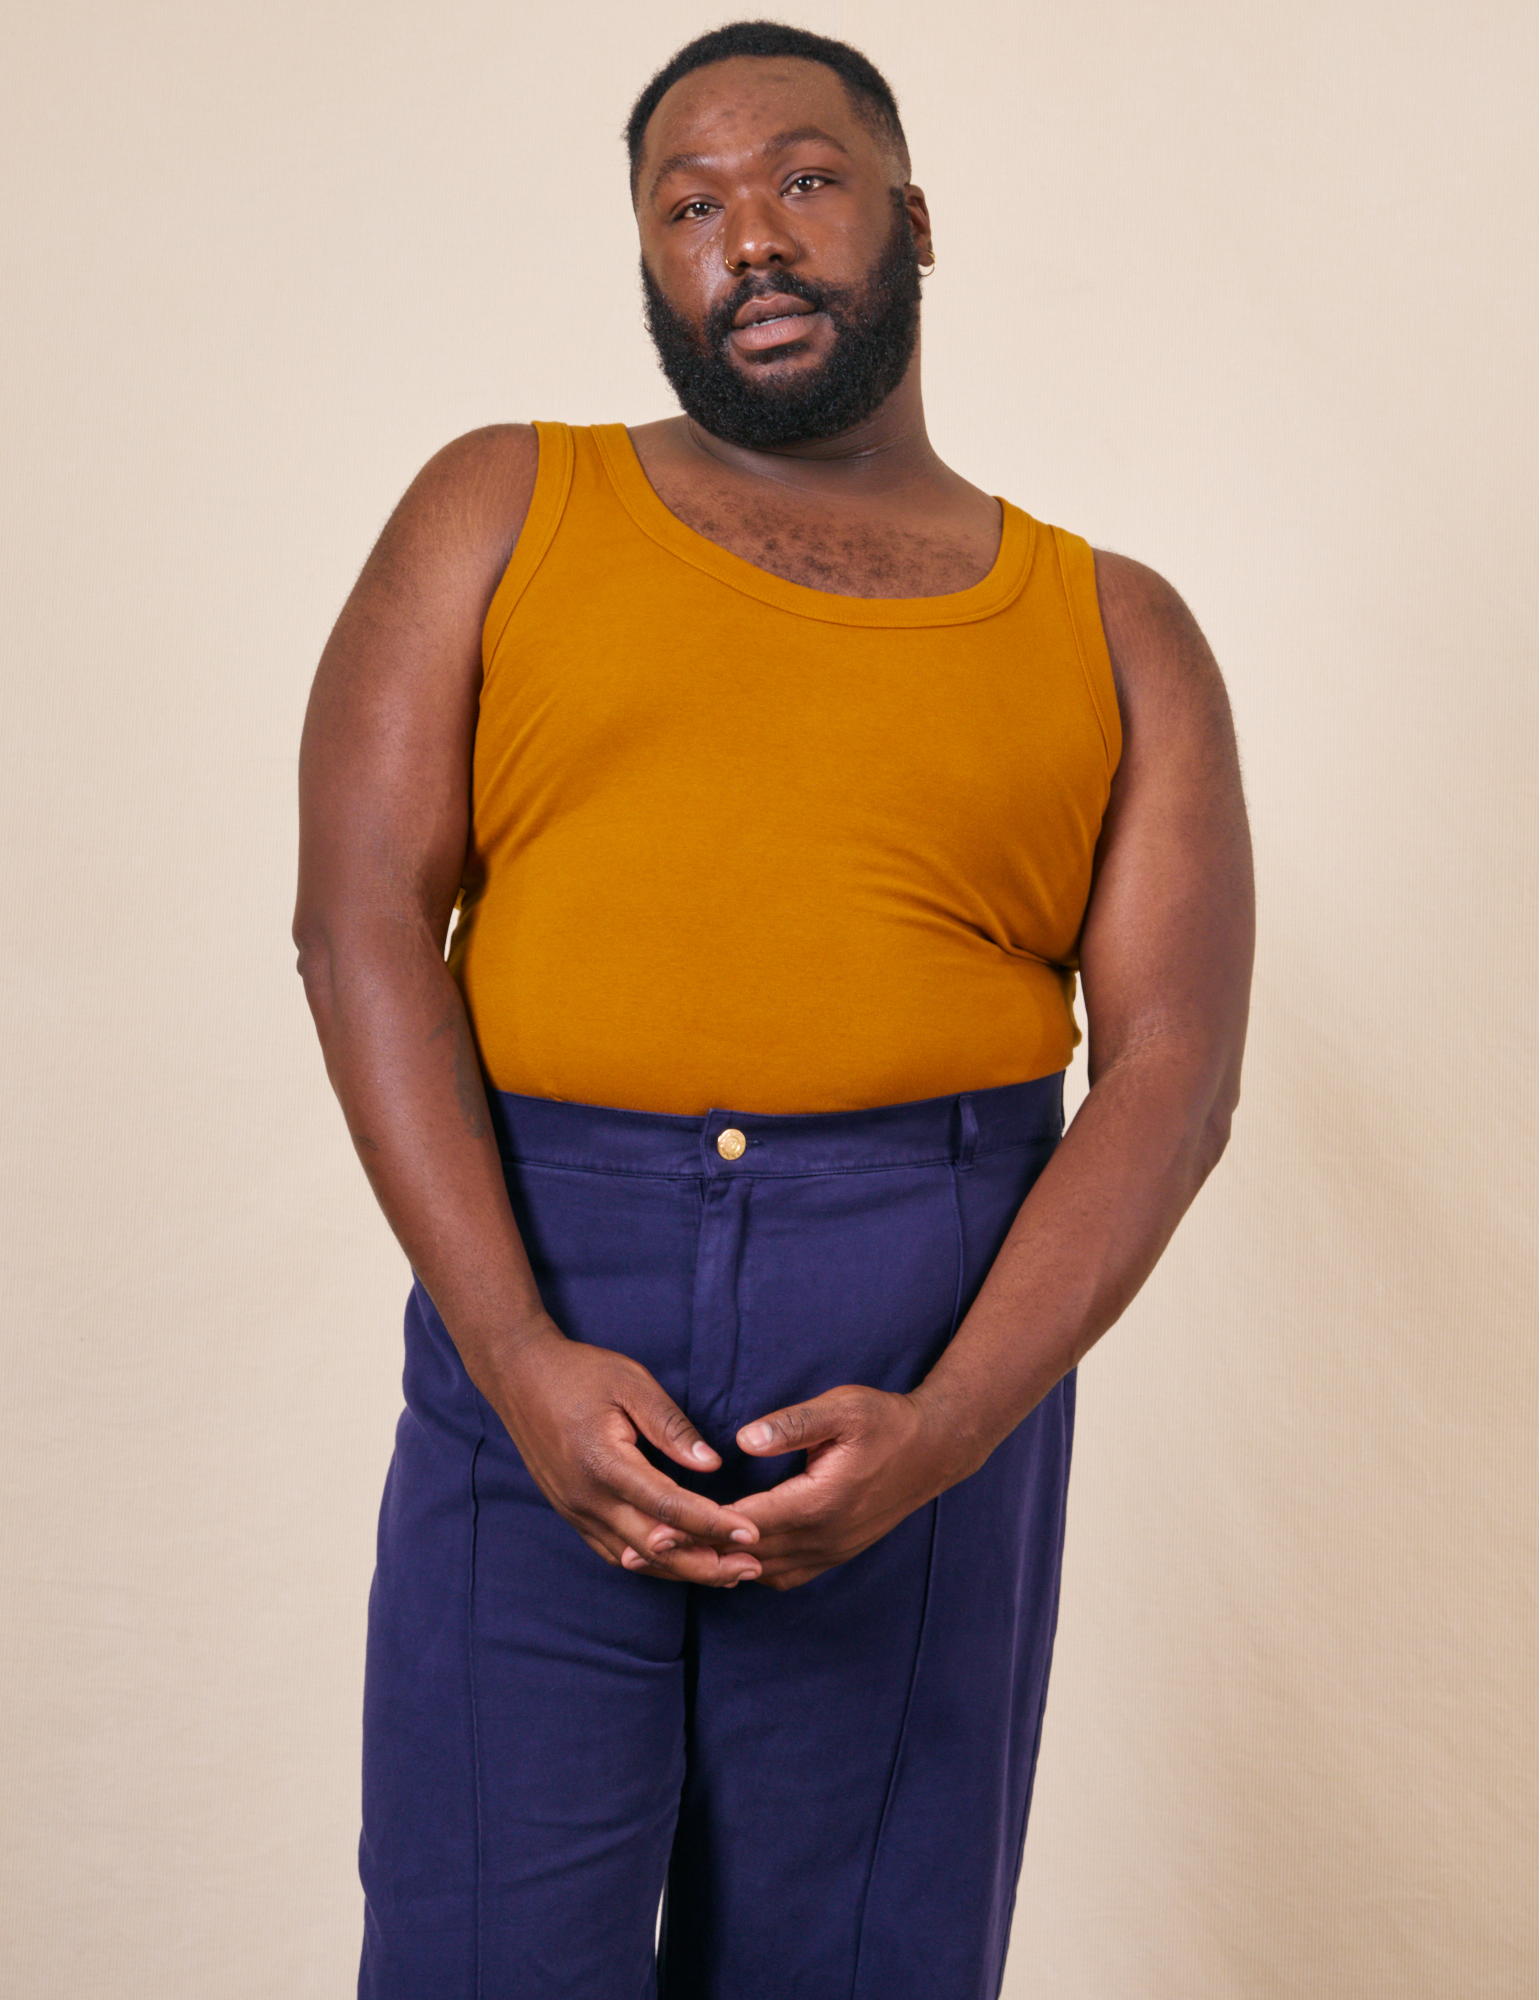 Elijah is wearing 3XL Tank Top in Spicy Mustard paired with navy Western Pants